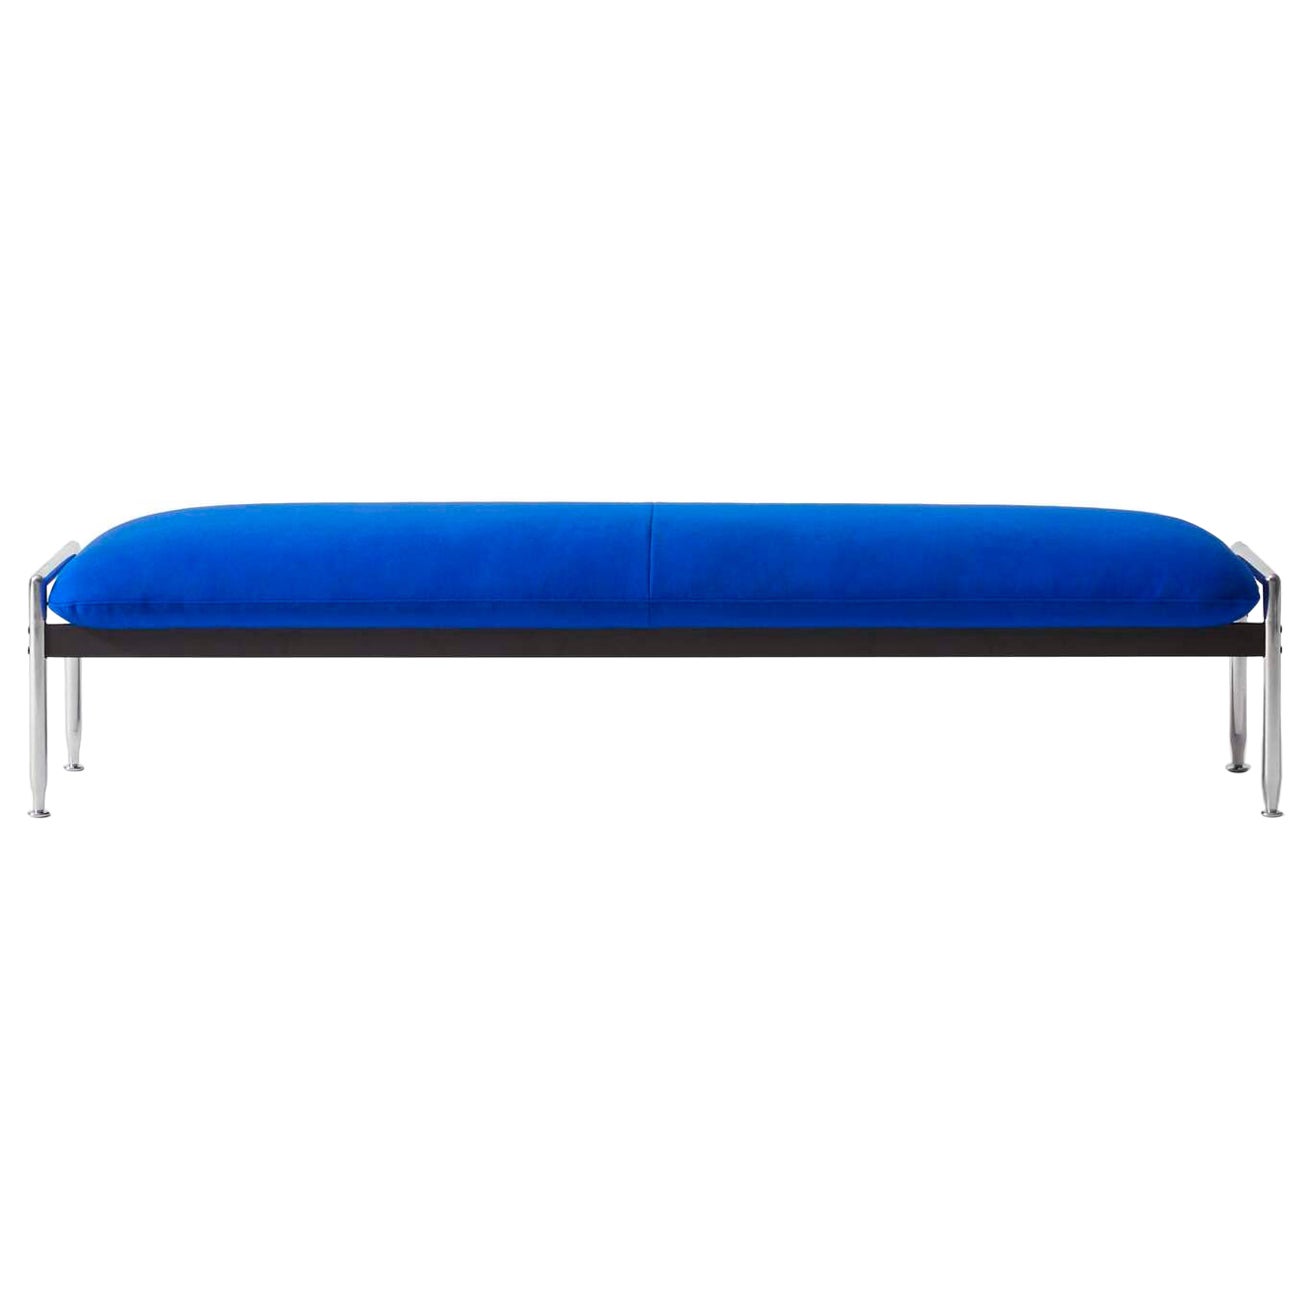 Antonio Citterio Esosoft Bench by Cassina, Italy - new For Sale